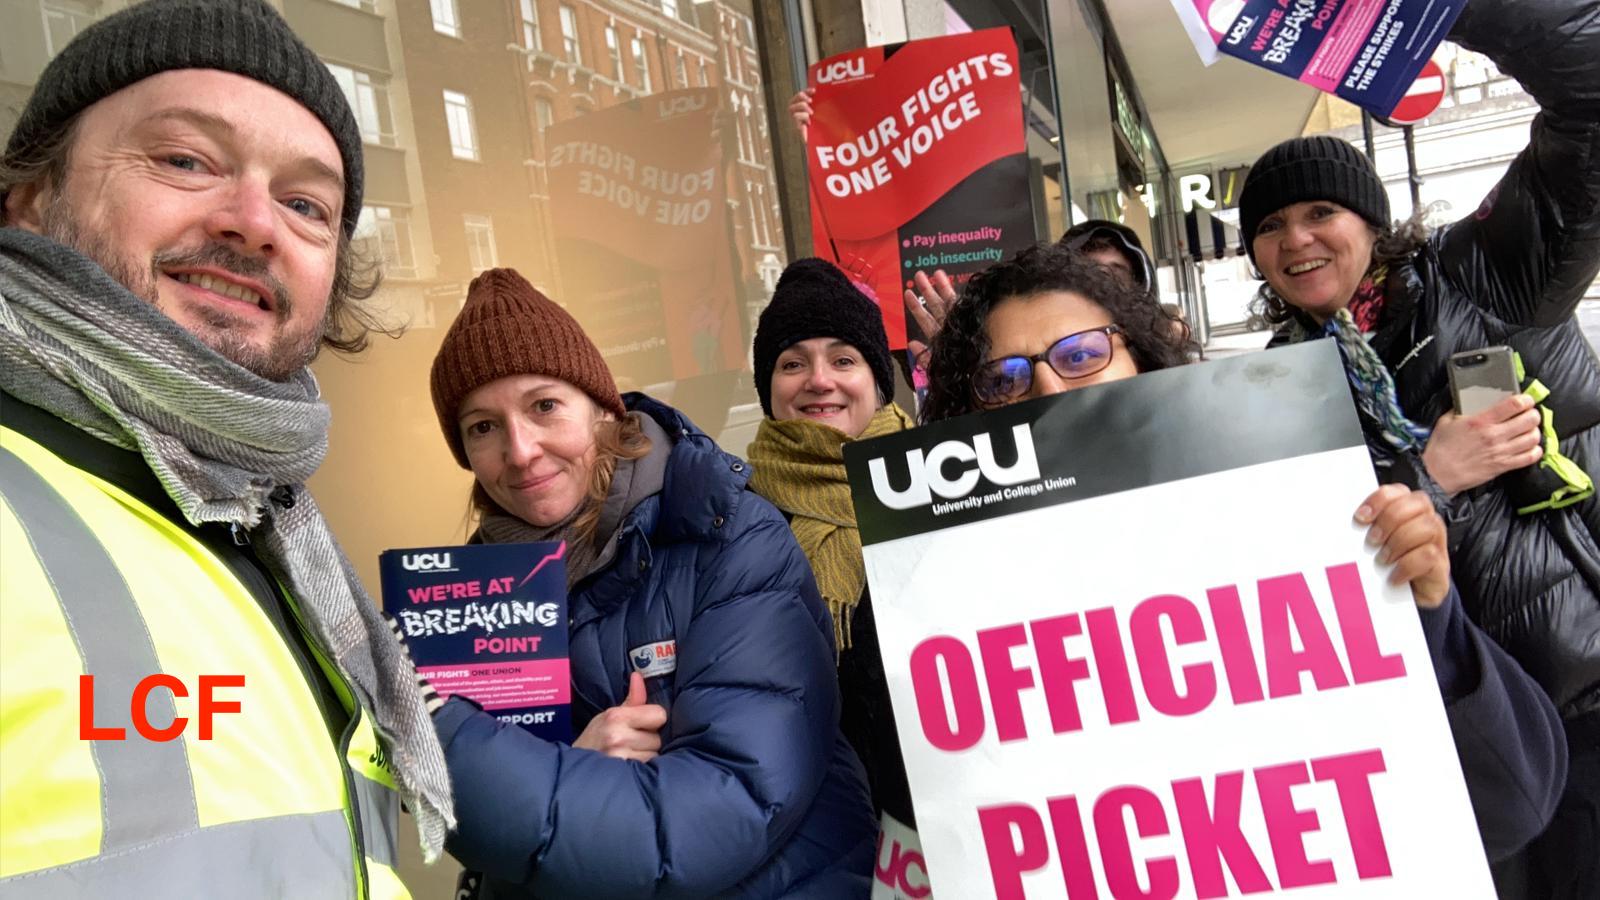 Picket at LCF 21st February 2022